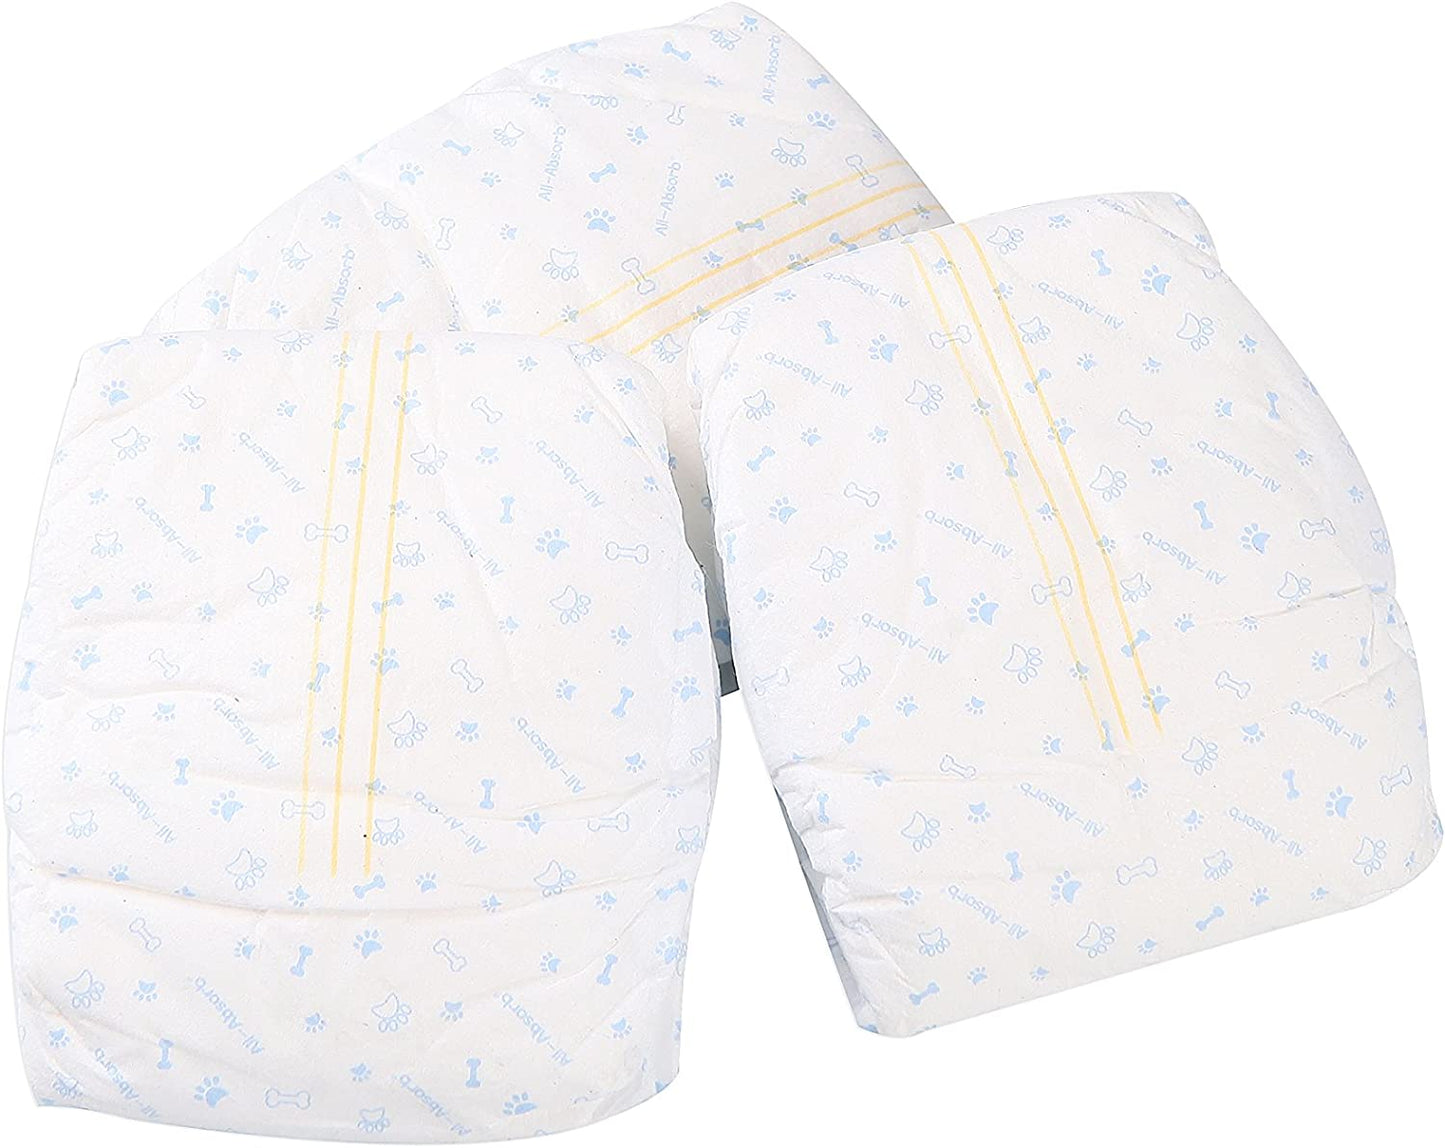 Donation for Puppy Guardian ,Dog Diaper, Potty Pad